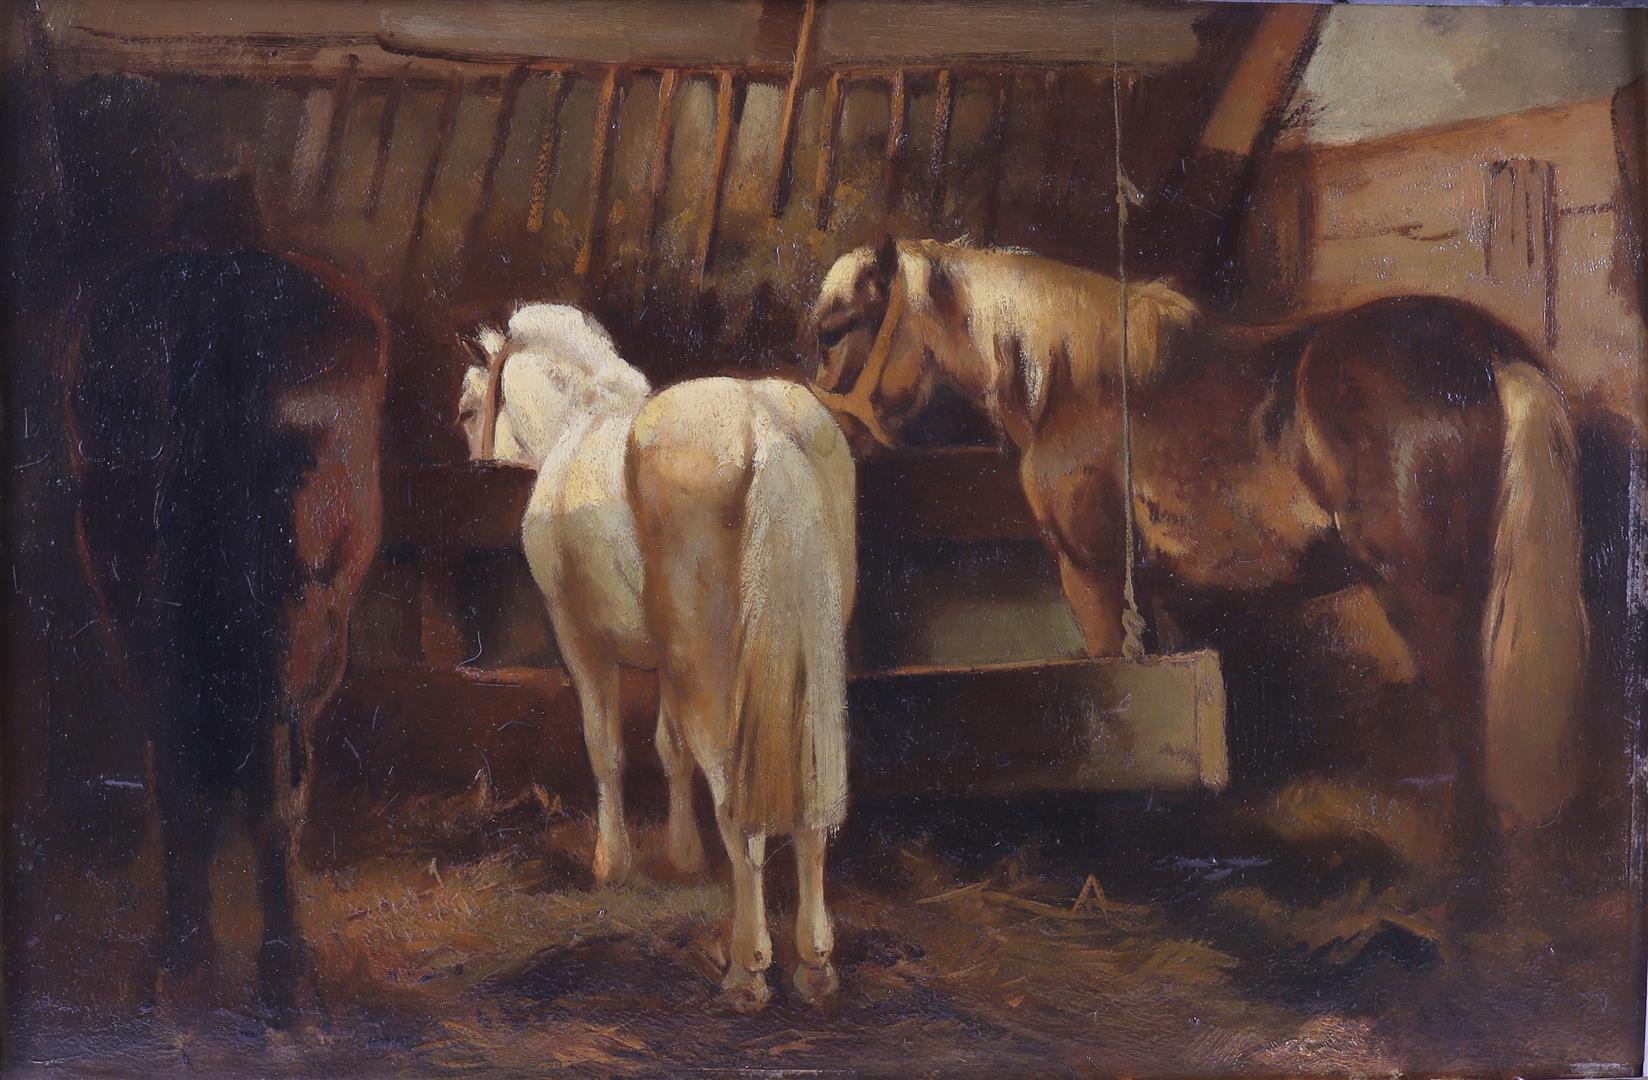 Verschuur, W Jr. (attributed to) “Horses in the stable”, - Image 3 of 4